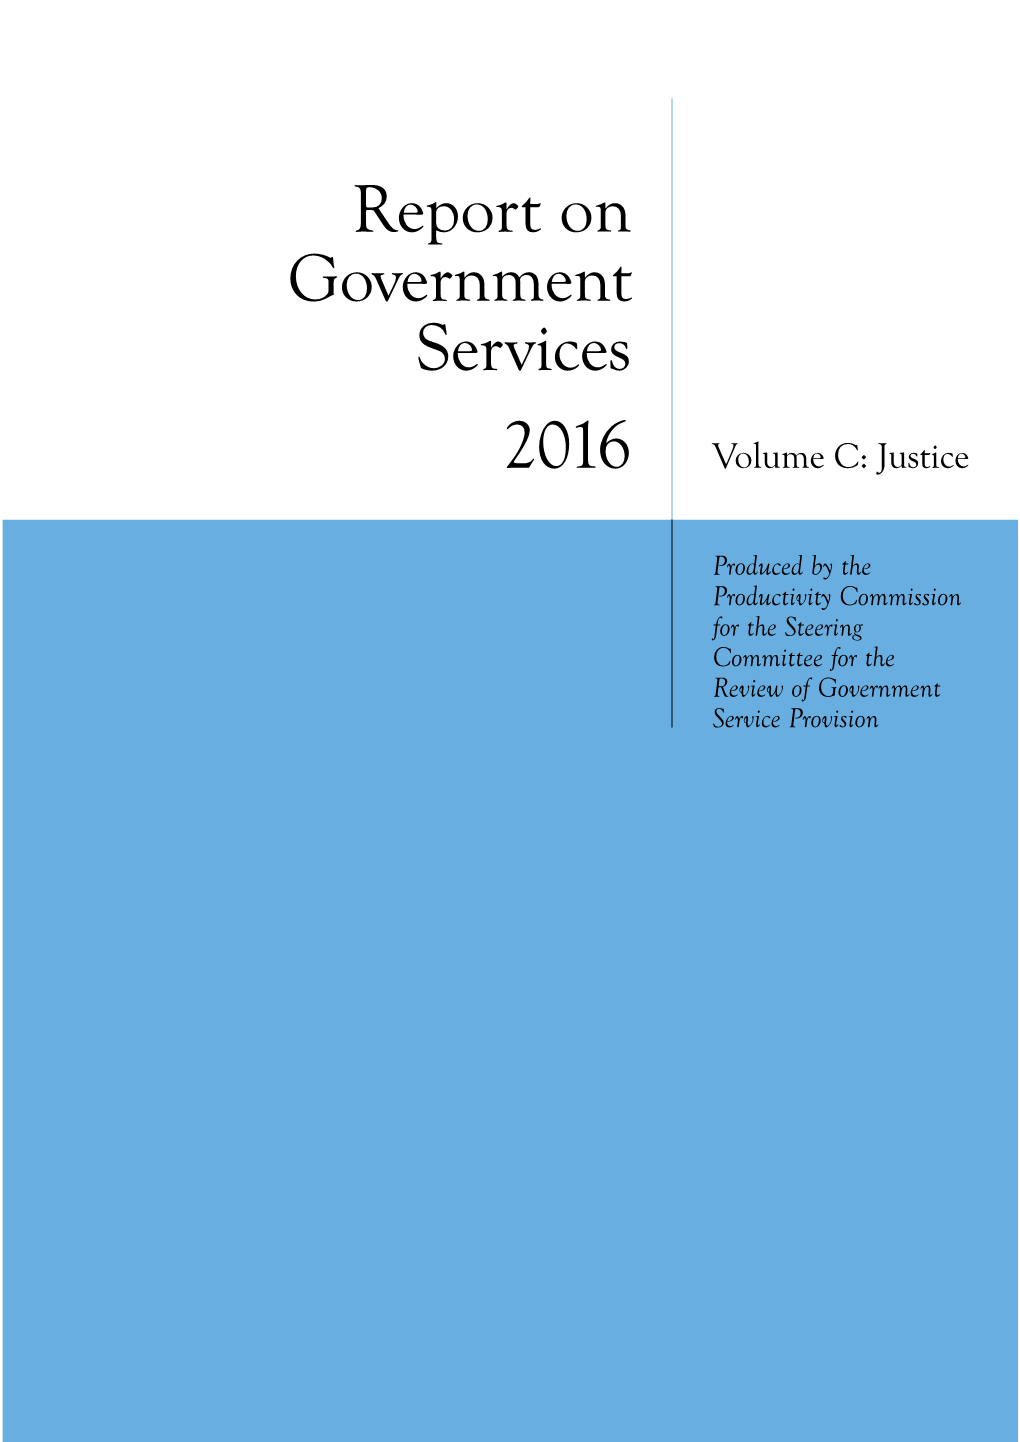 Report on Government Services 2016 Volume C: Justice